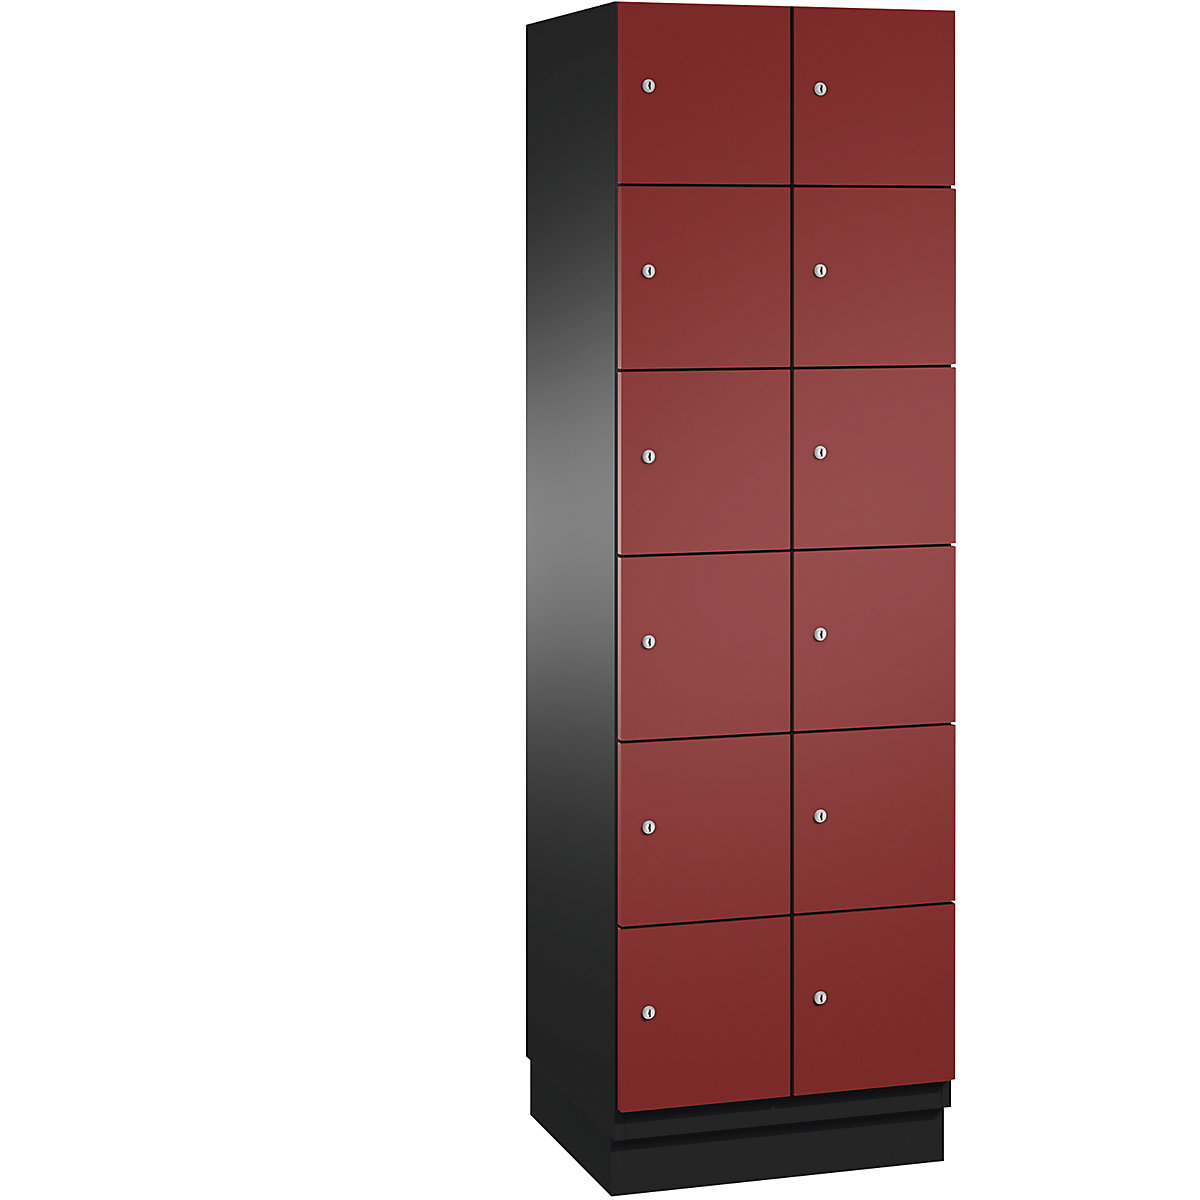 CAMBIO compartment locker with sheet steel doors – C+P, 12 compartments, width 600 mm, body black grey / door ruby red-11